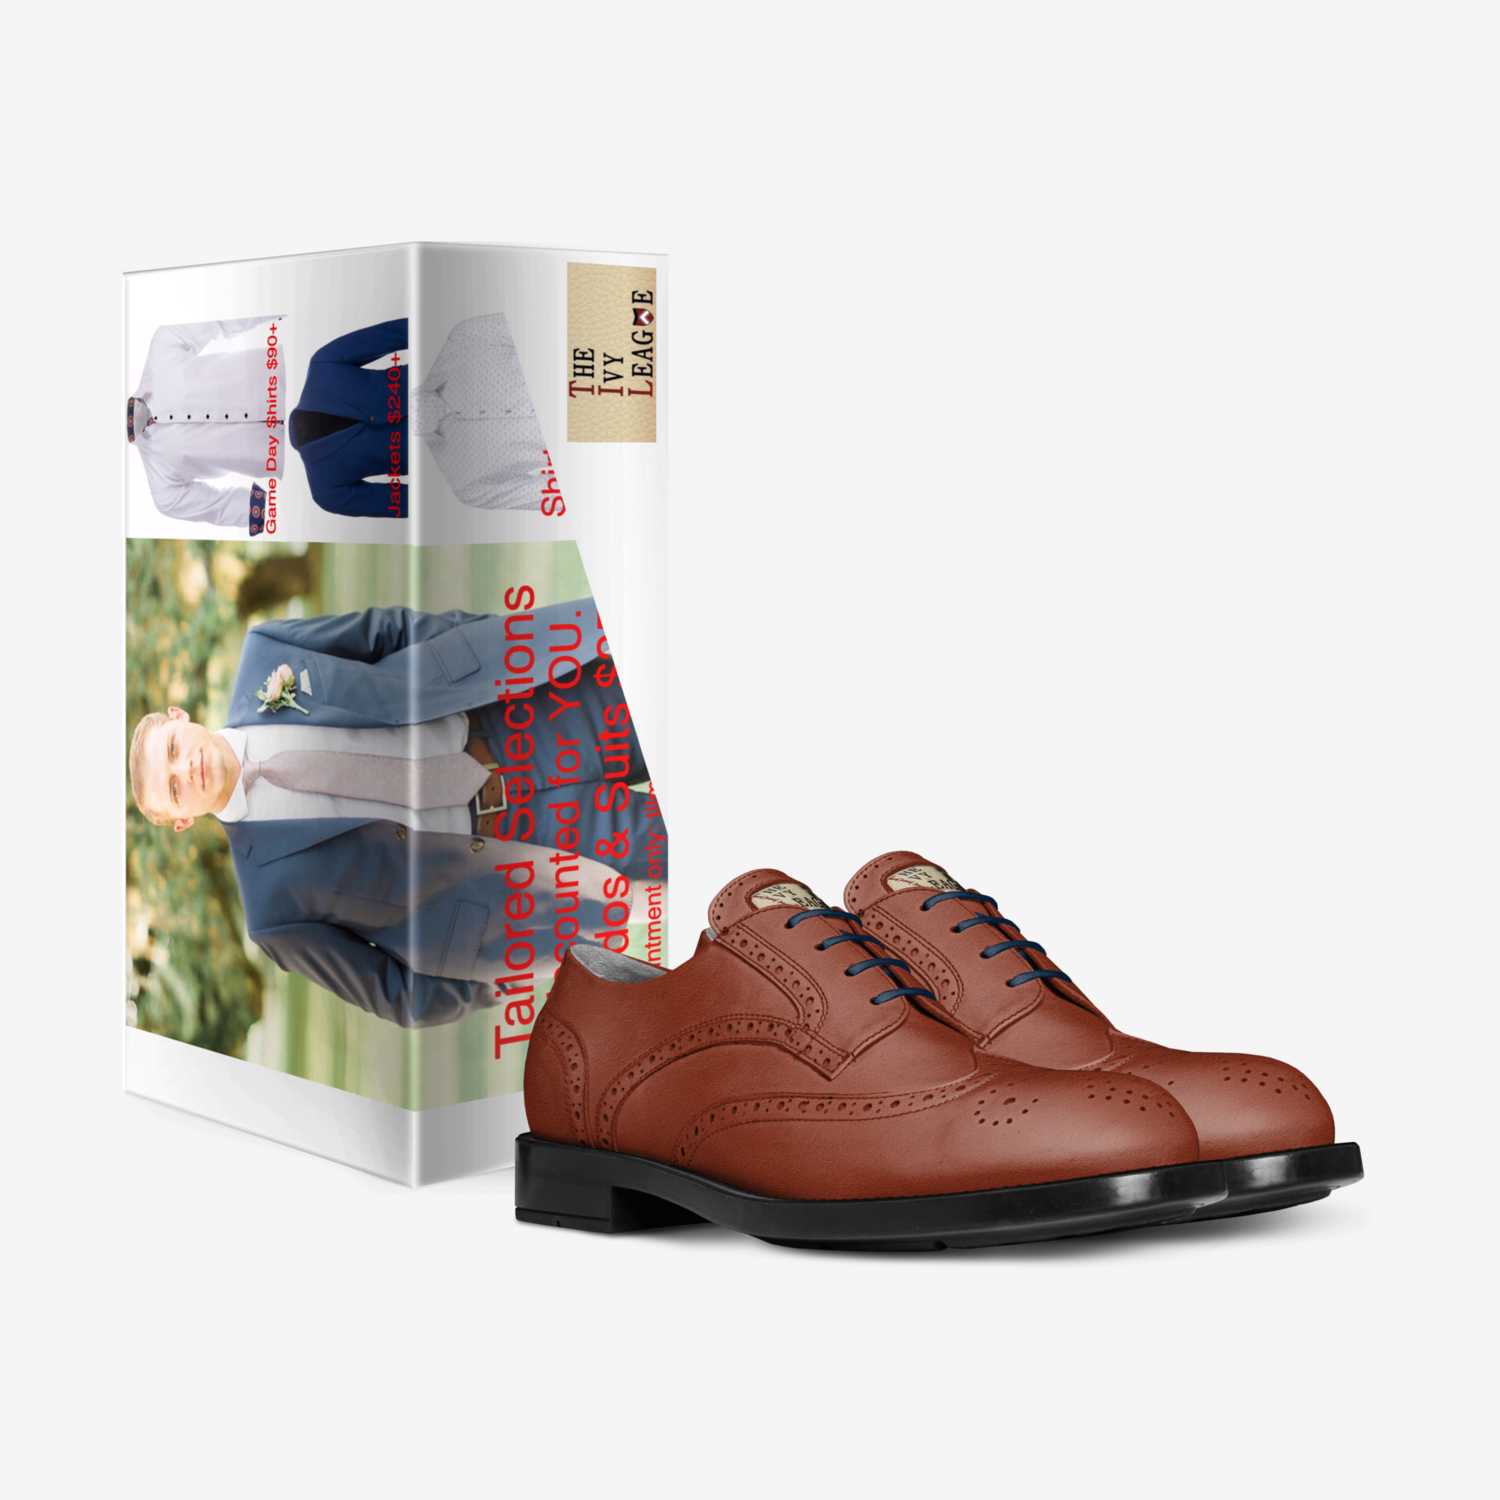 The Ivy League  custom made in Italy shoes by Victor Hart | Box view